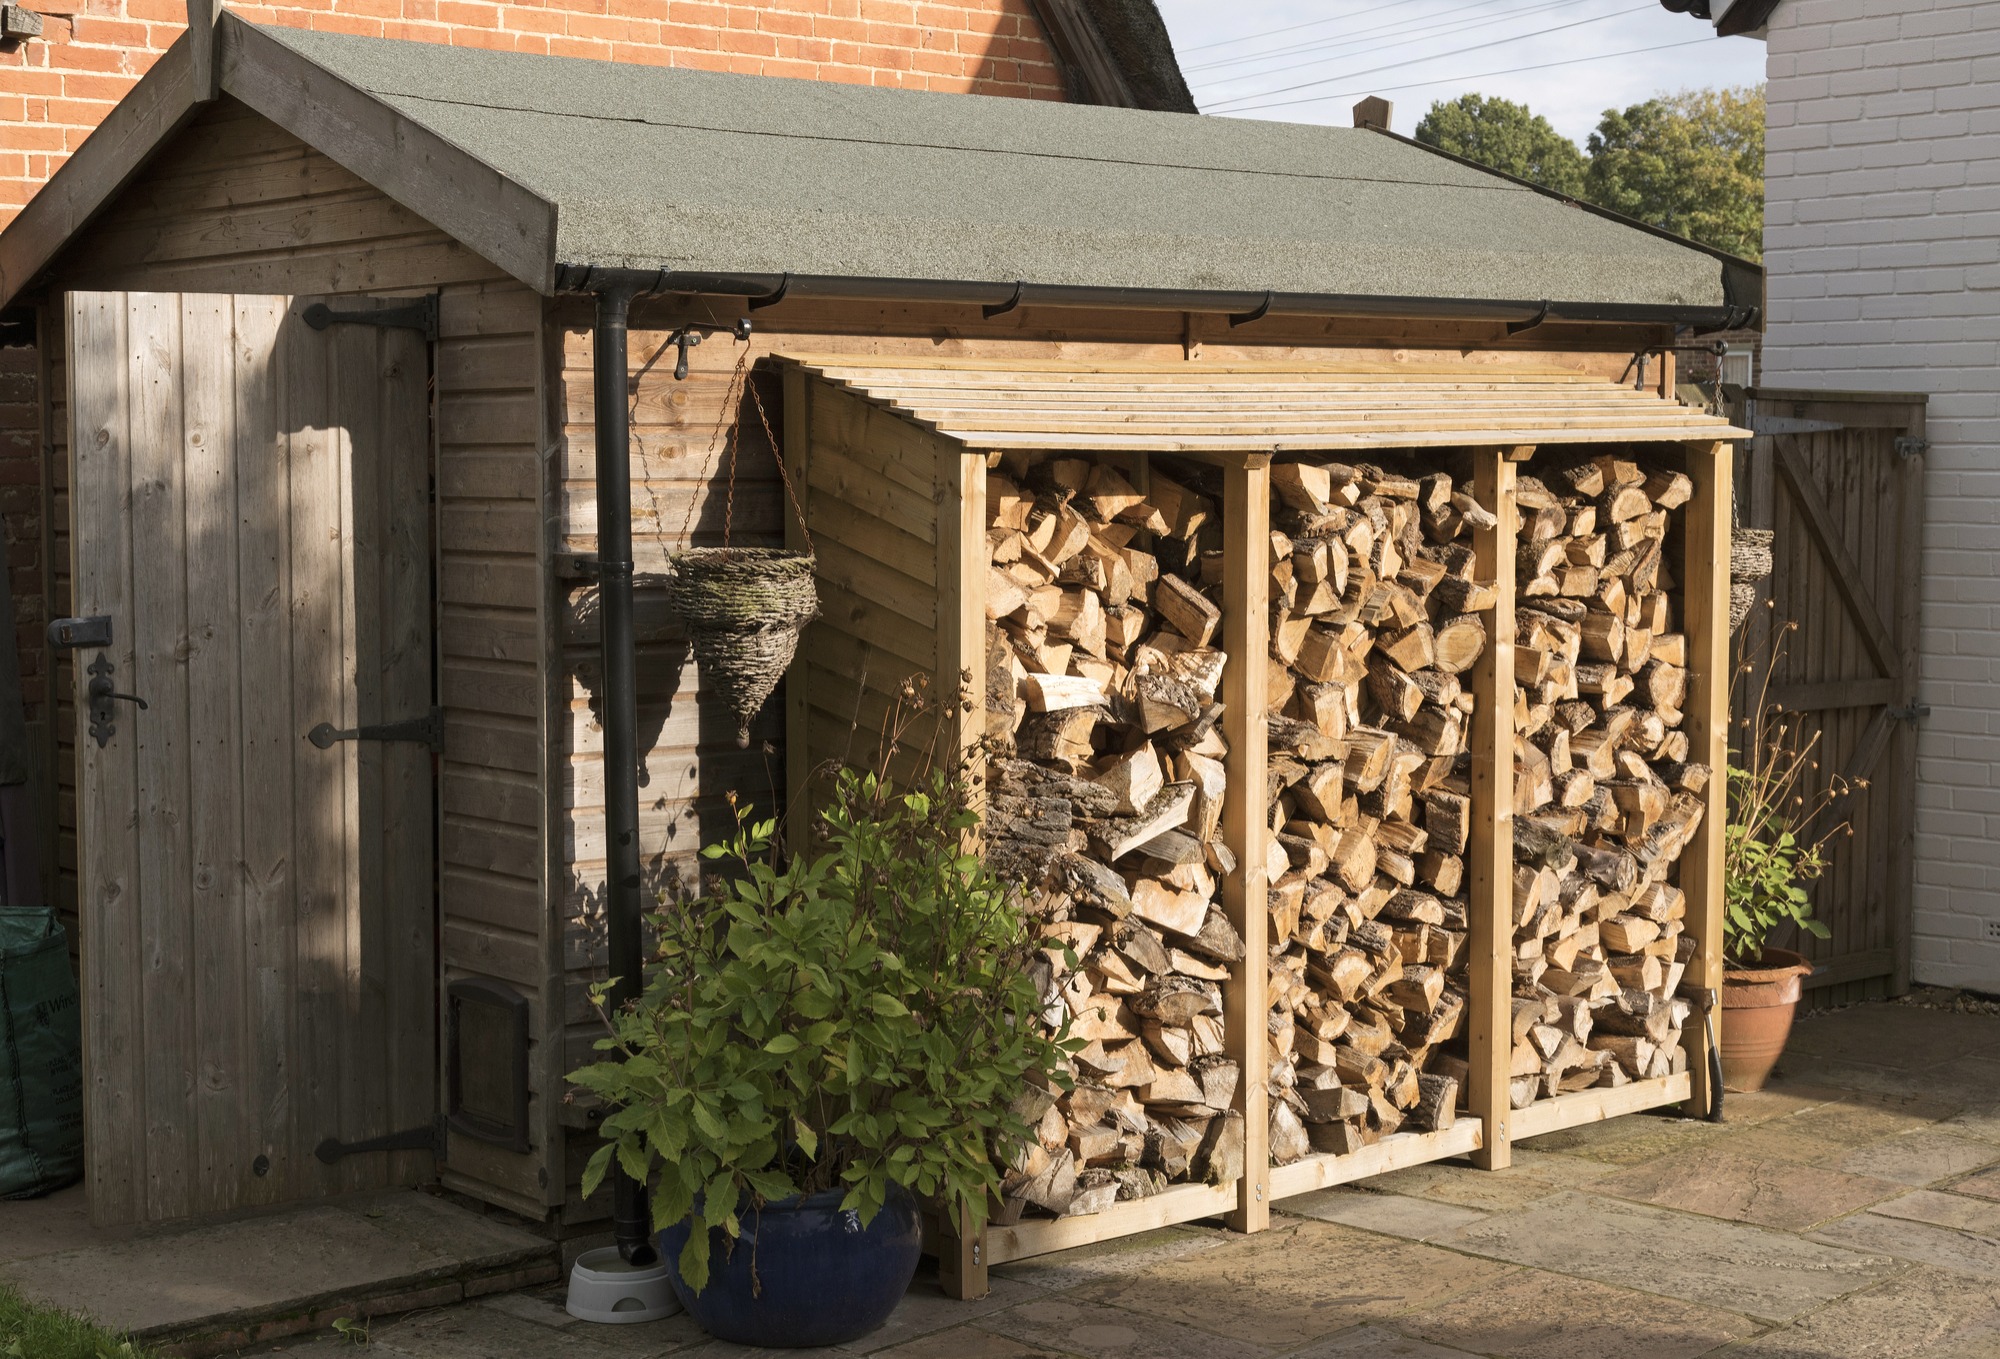 How May a Woodpile Be Covered